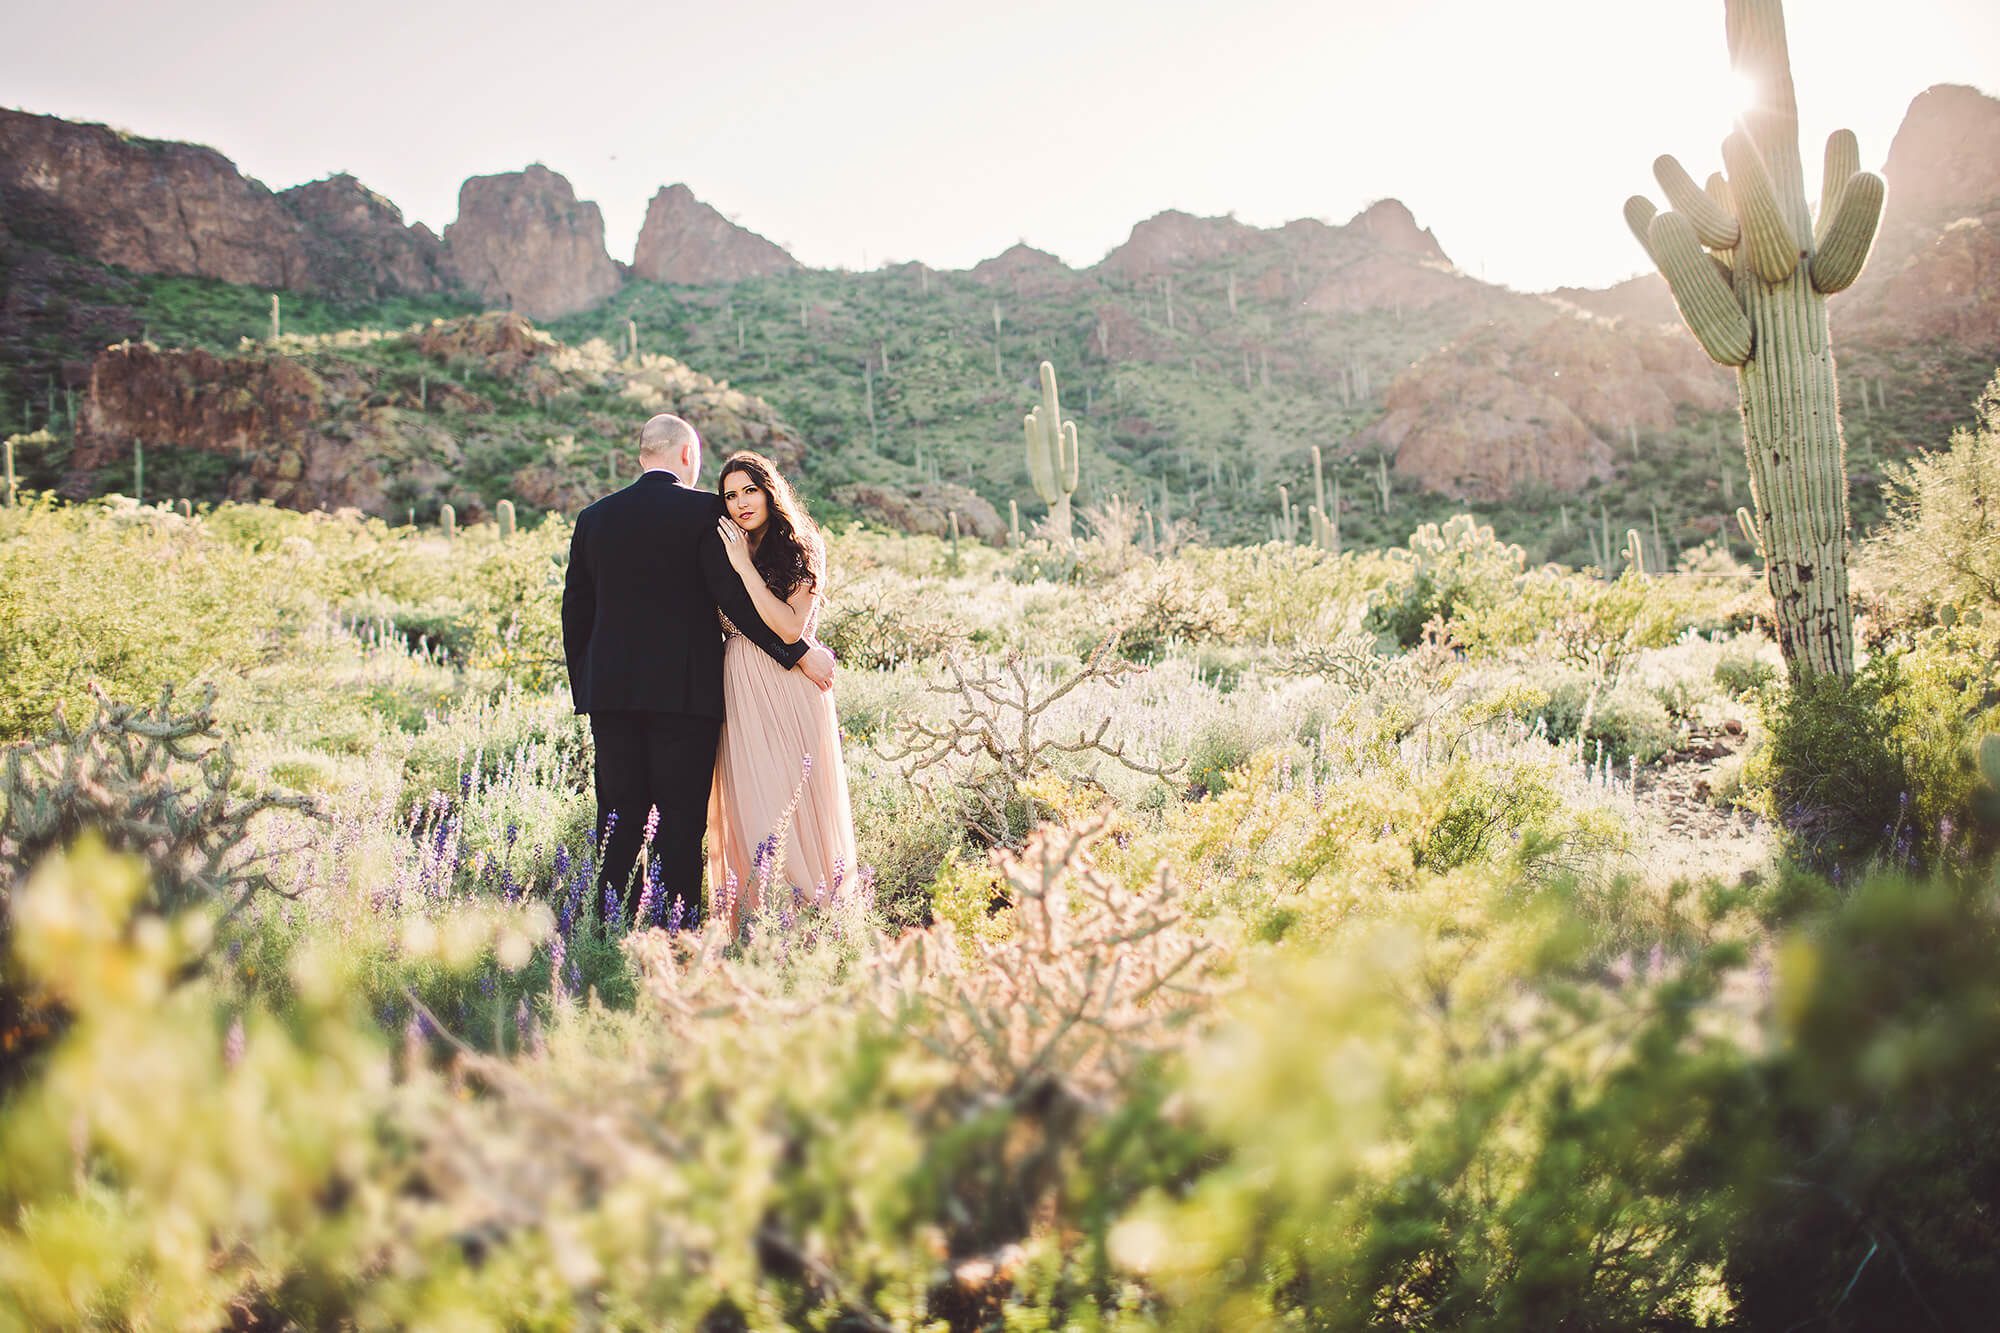 Standing in the sunlight amongst the wildflowers, the Paxman's hold one another during their couple's session at Picacho Peak